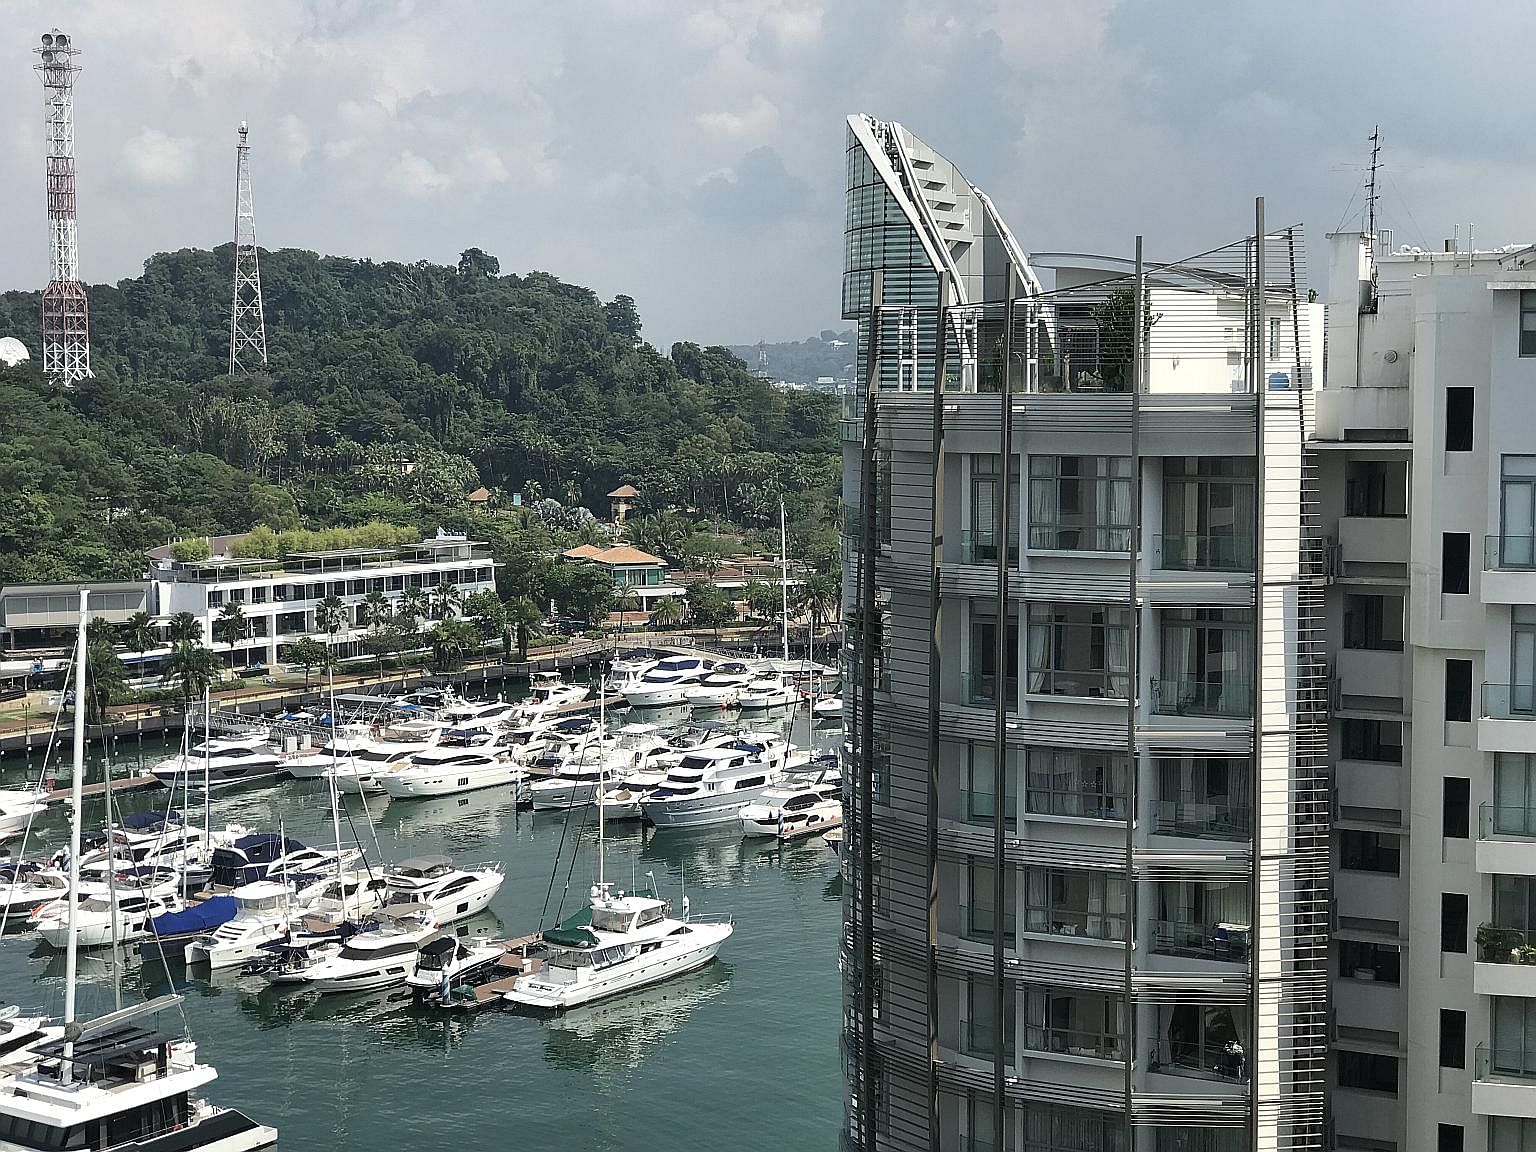 The 11th-storey duplex penthouse (top right), which was relisted several times over the past three years, was eventually sold by Edmund Tie & Company to Kenyan diplomat Neal Manilal Chandaria, whose family is in the process of moving in. The buyer vi